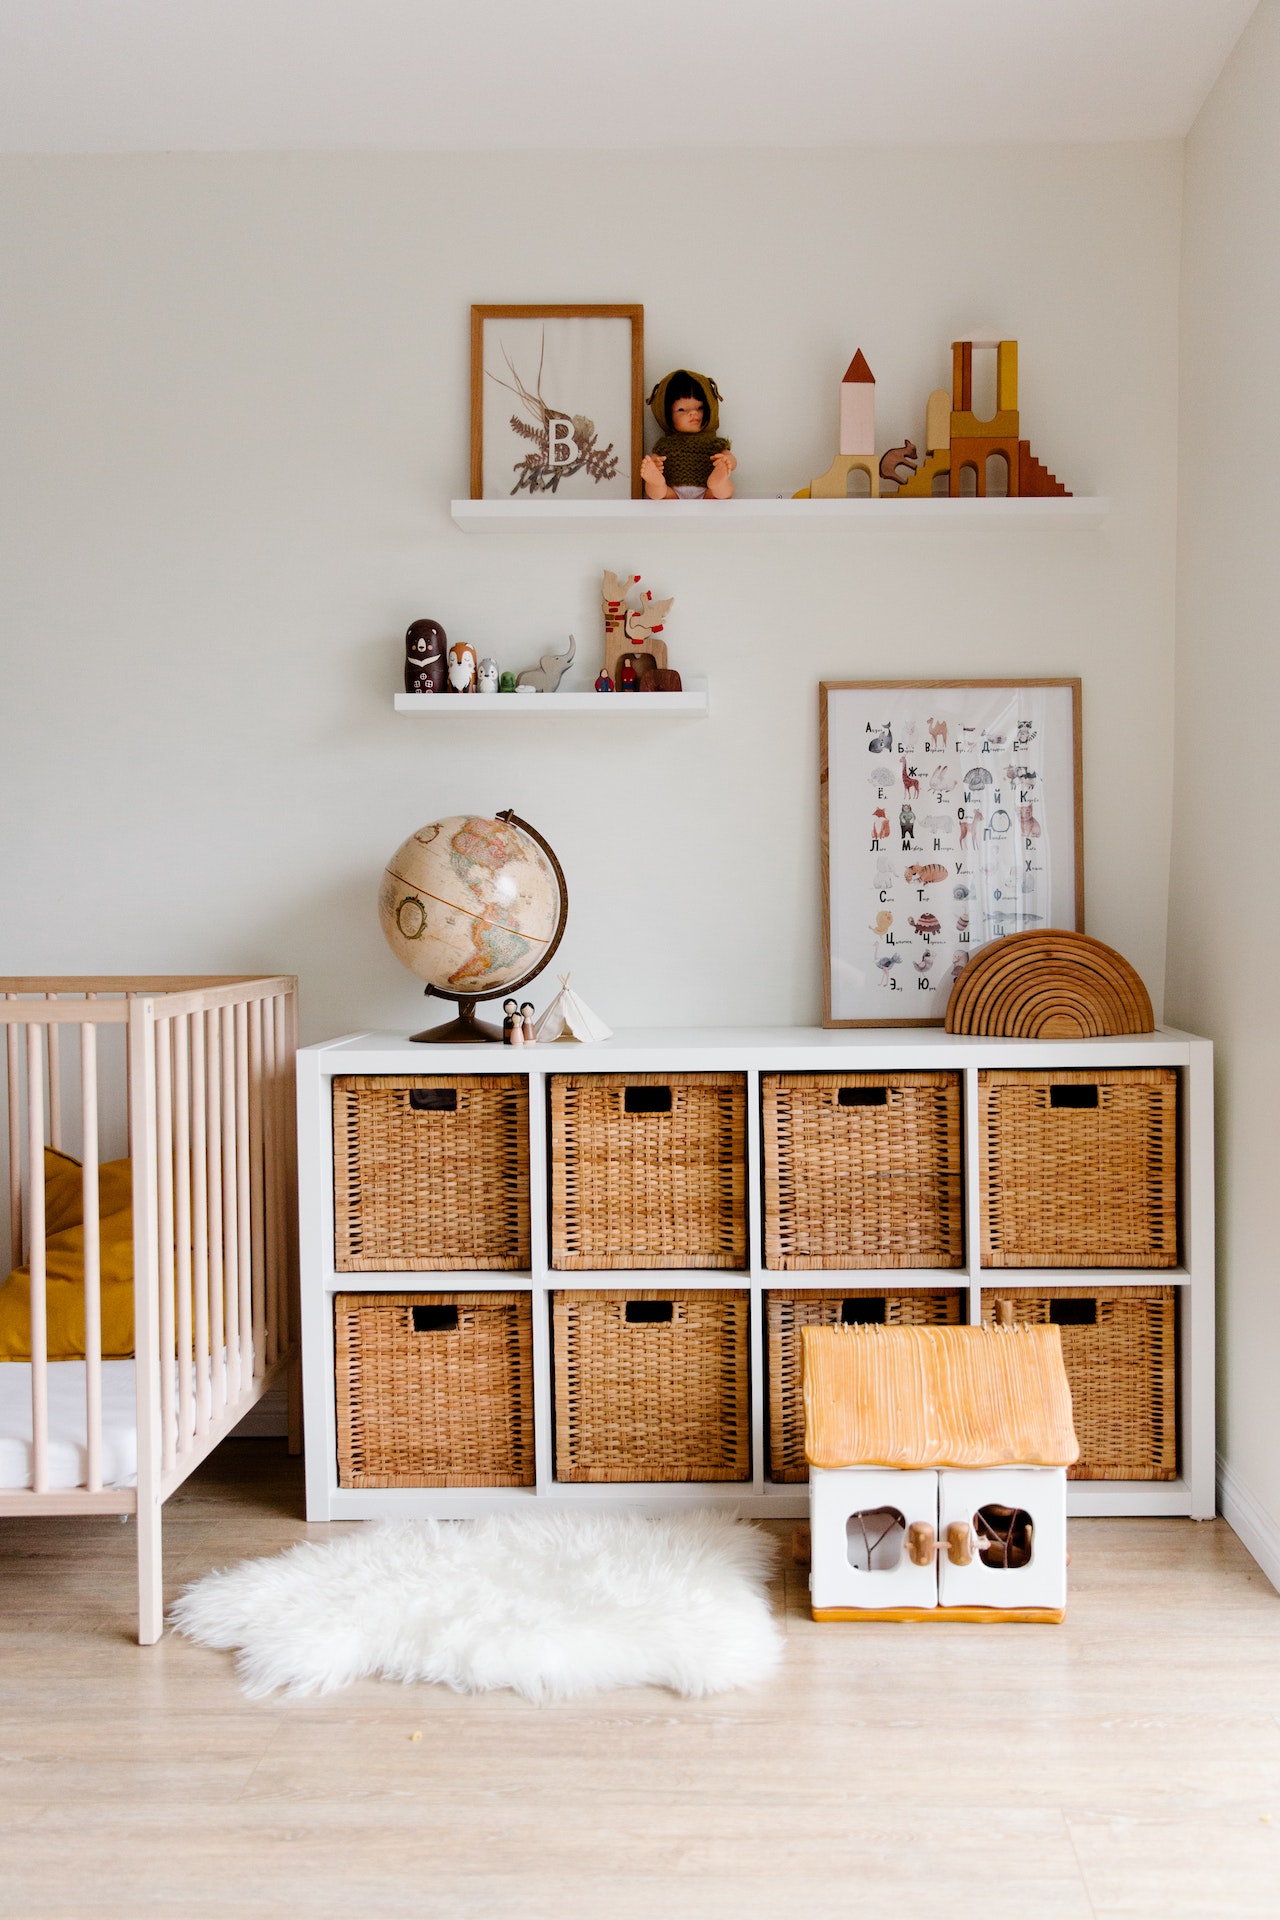 Room storage with baskets